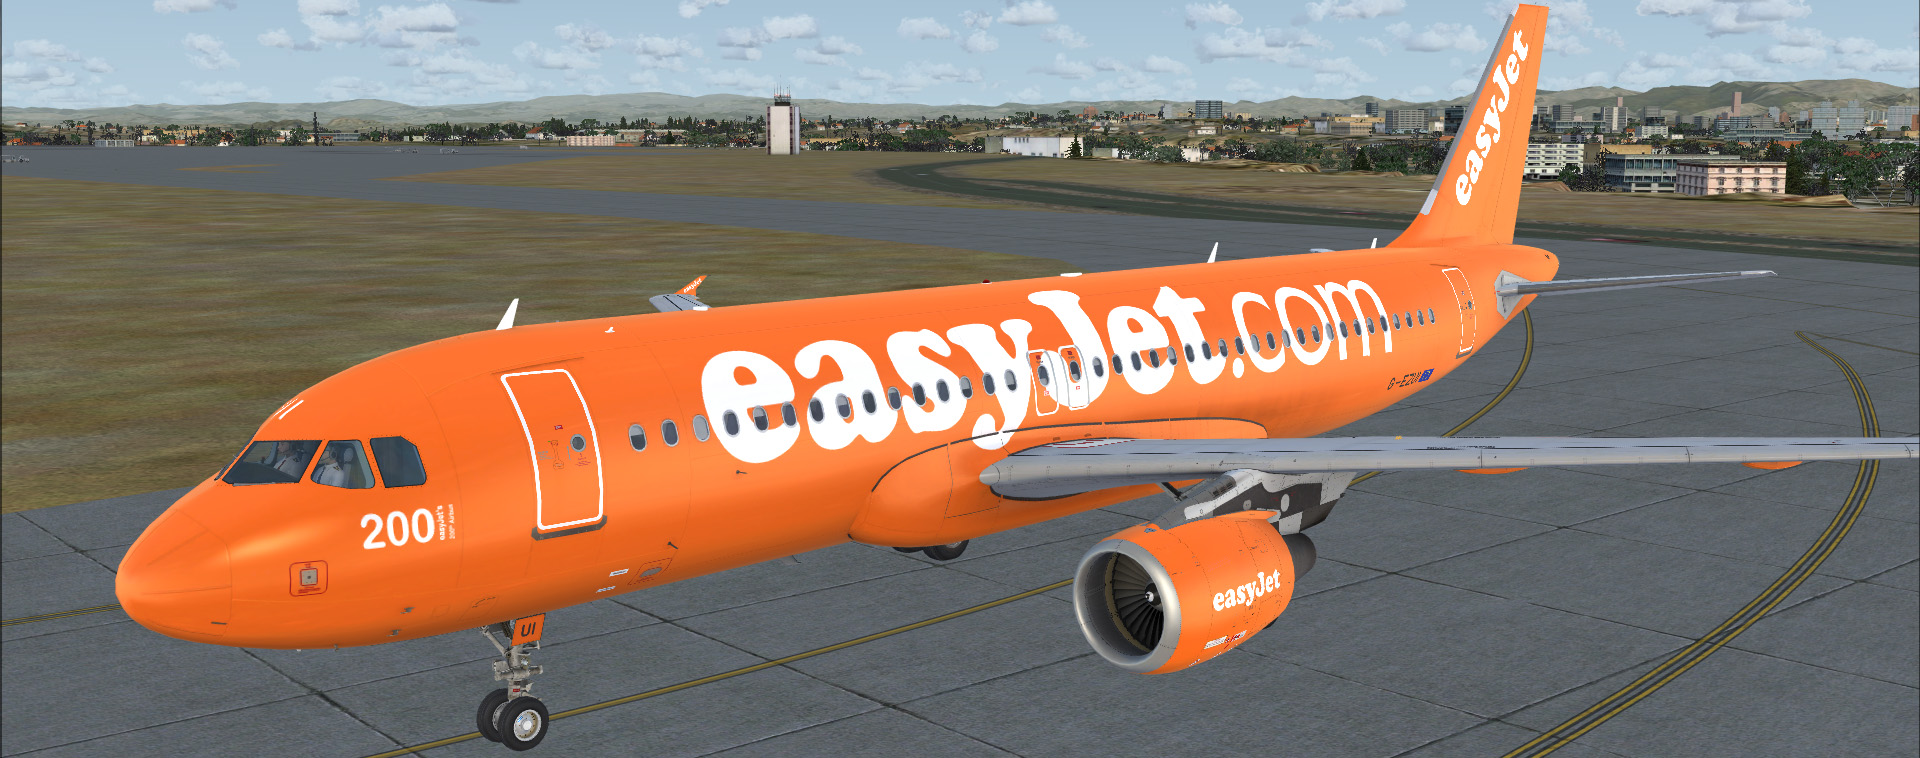 More information about "easyJet A320-214 G-EZUI 200th Airbus"